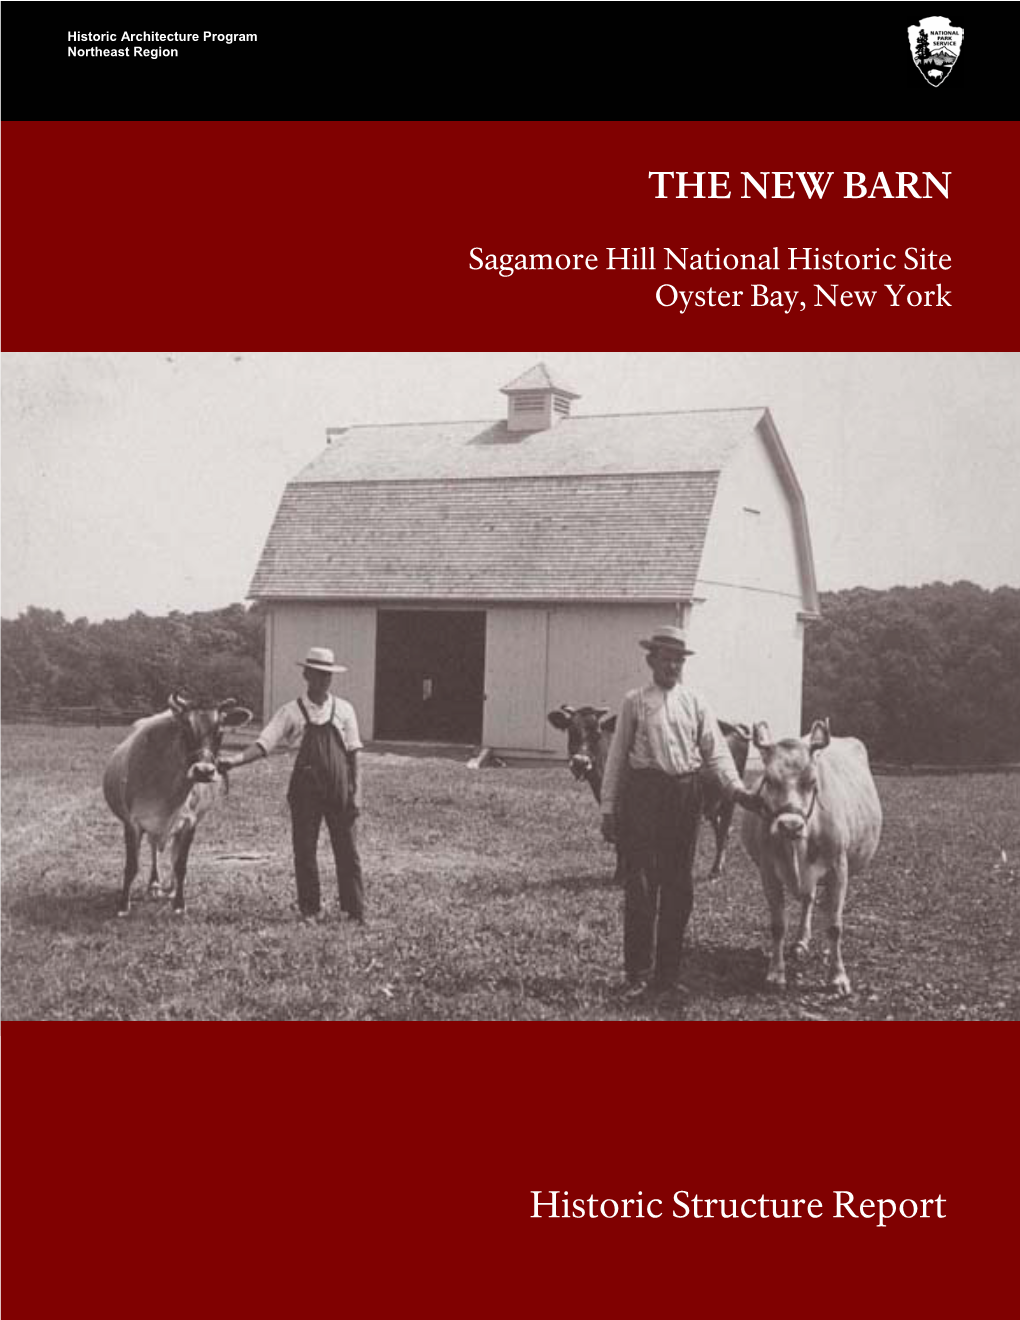 The New Barn Historic Structure Report Would Not Have Been Possible Without the Assistance of the Staff at Sagamore Hill National Historical Site